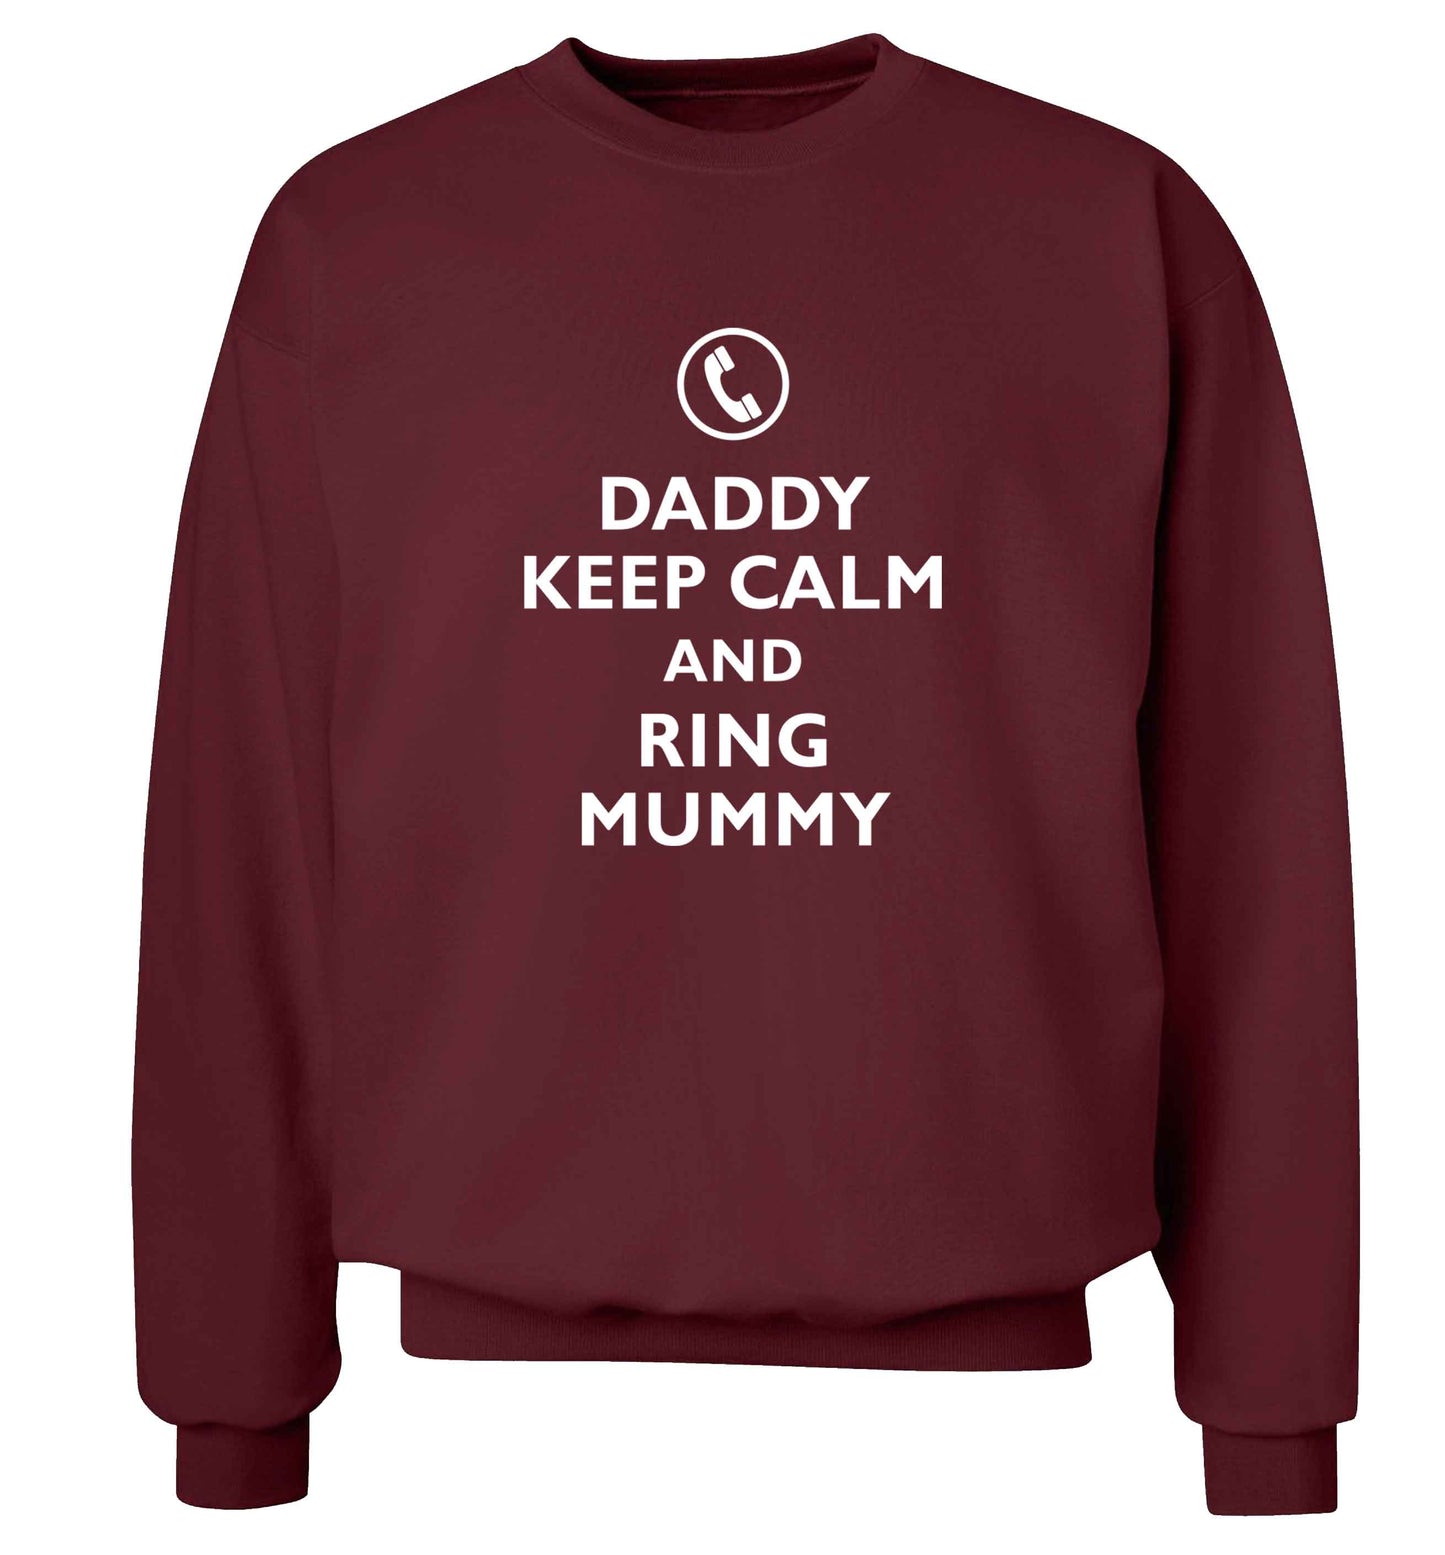 Daddy keep calm and ring mummy adult's unisex maroon sweater 2XL